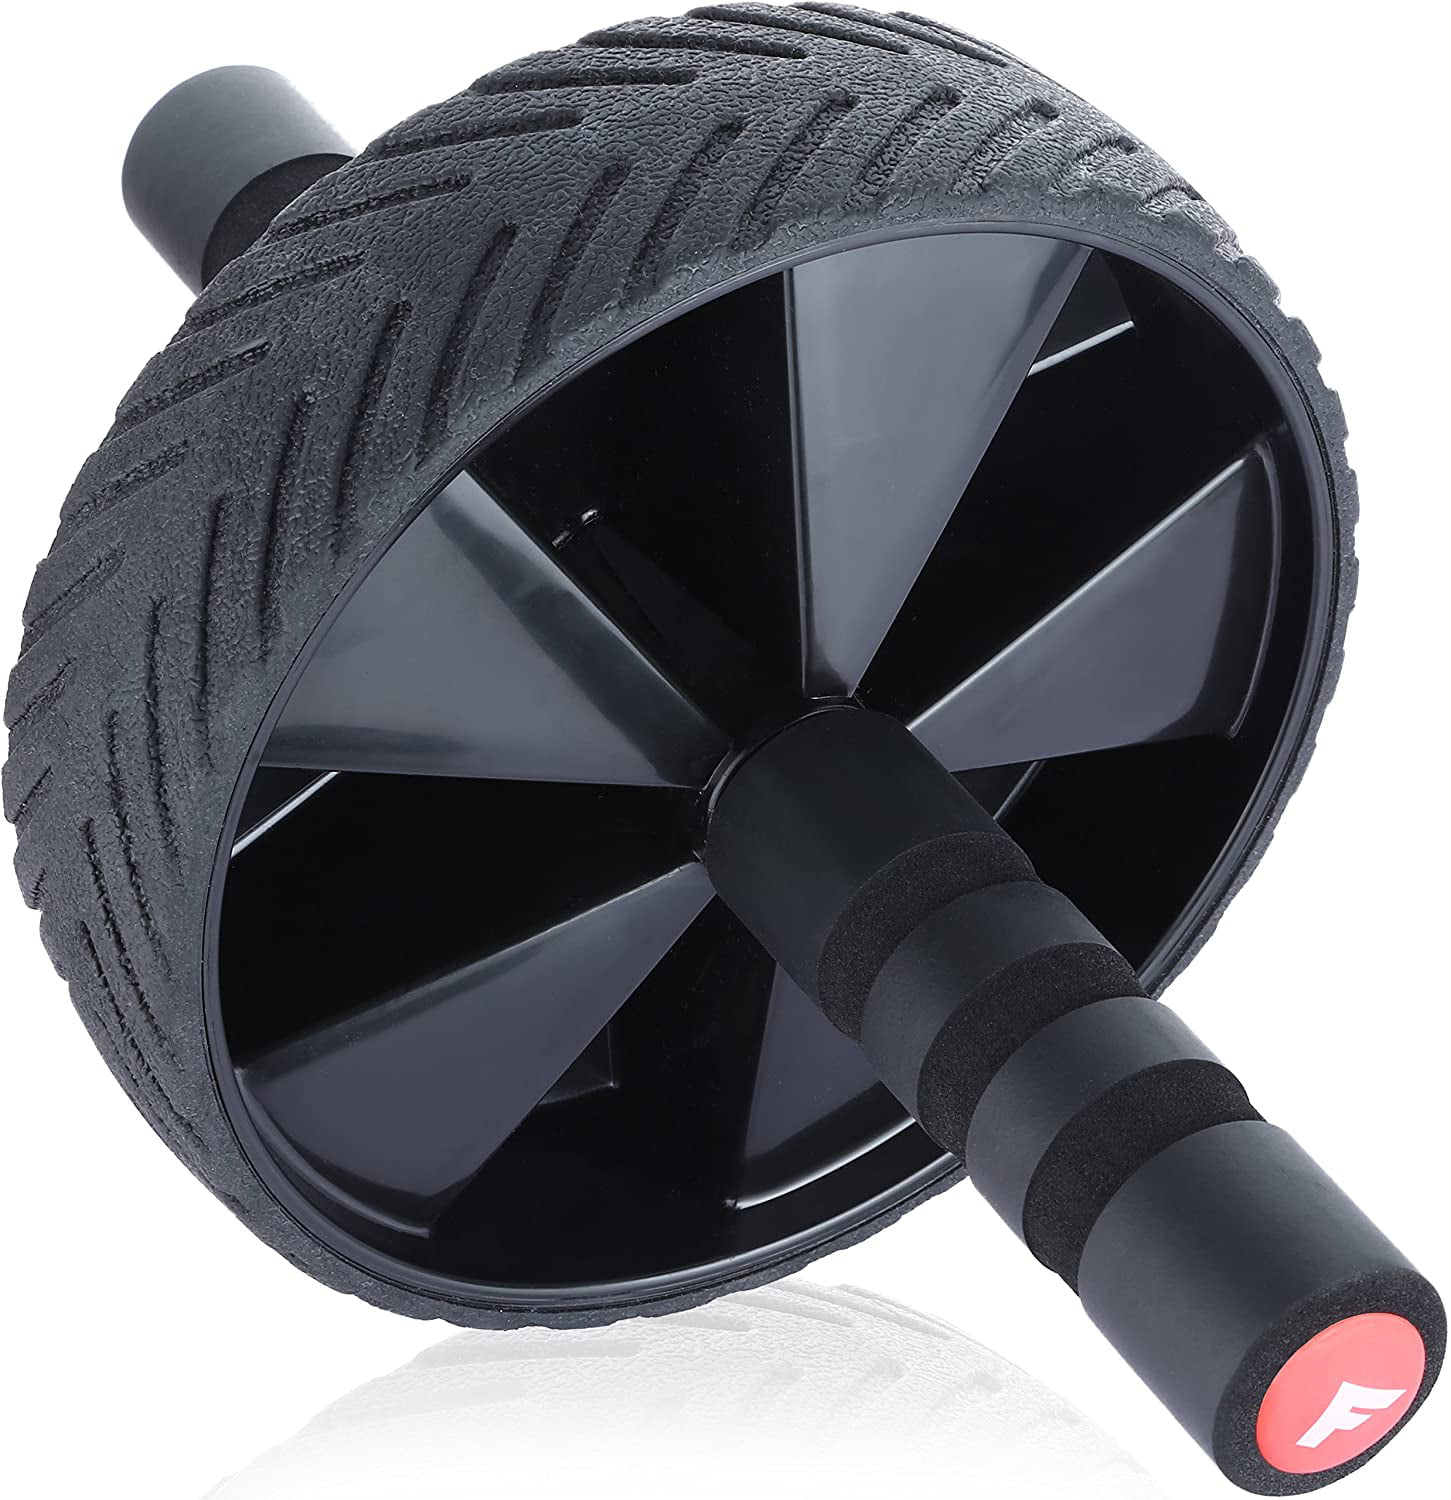 MEROURII Ab Roller Wheel Unisex Core Abdominal Workout Home Core Workout Gym Equipment Ab Wheel Exercise Fitness Equipment